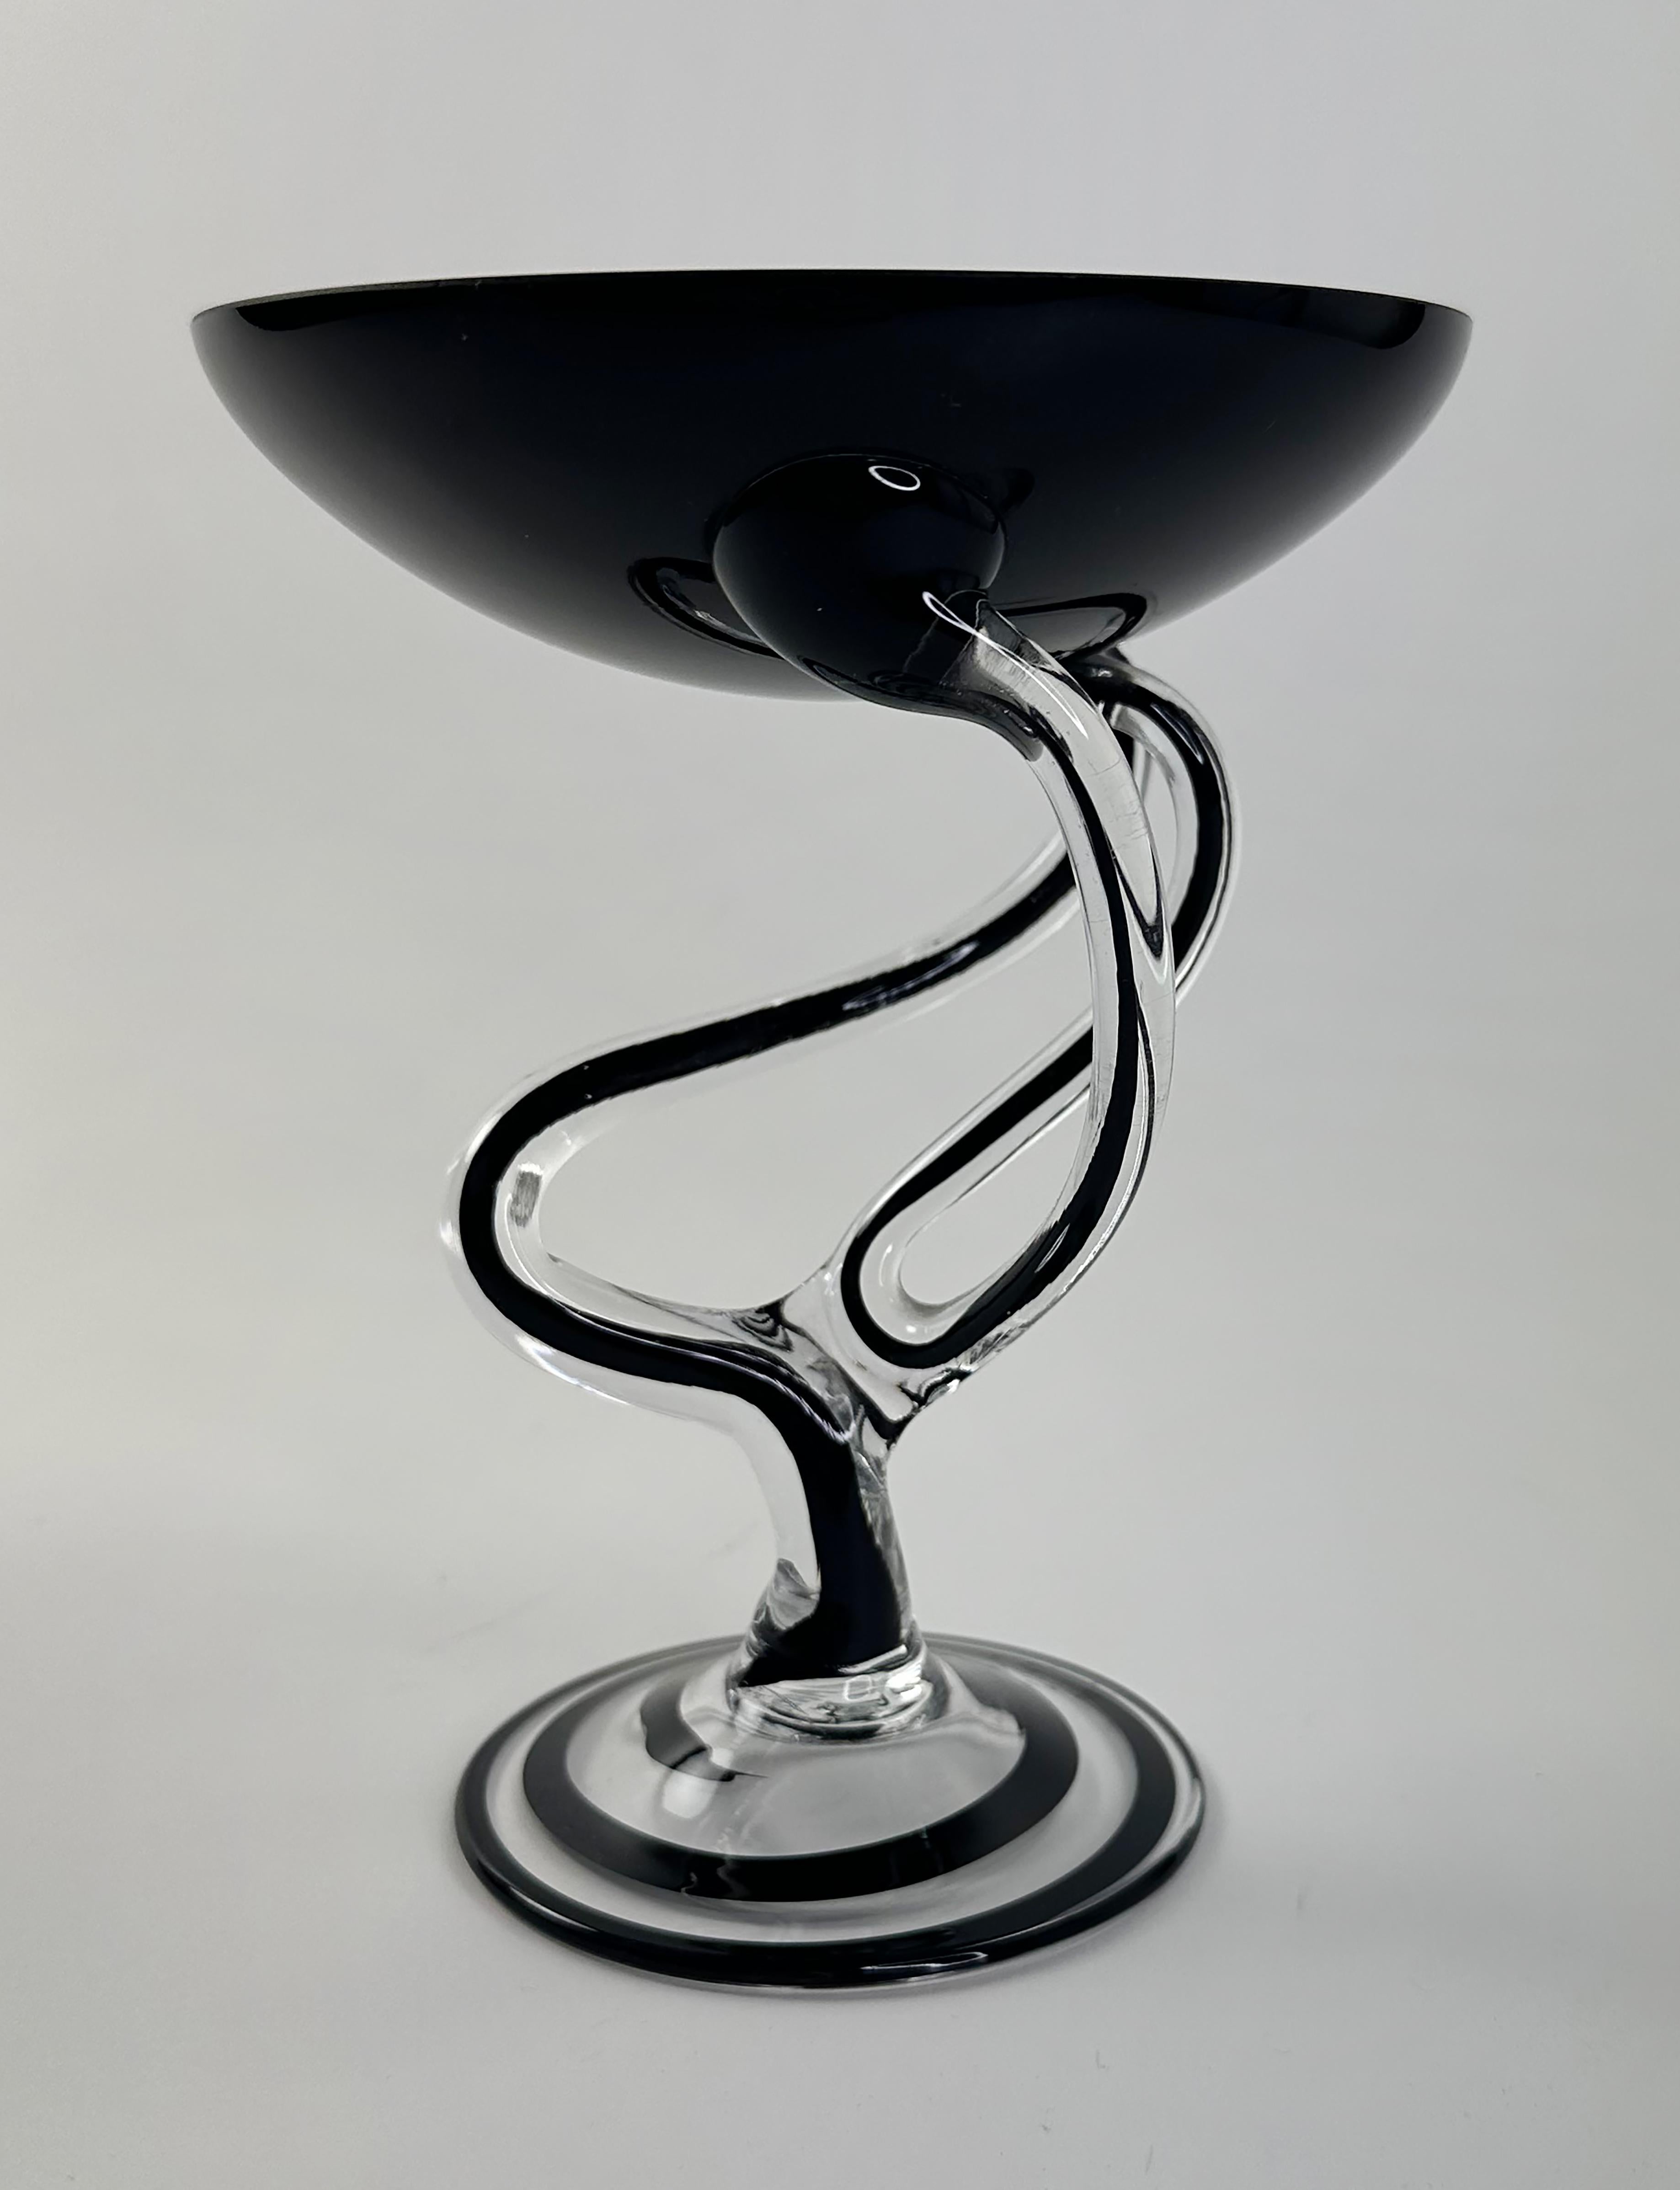 A handsome hand-blown Art Deco glass compote. In the style of a Jozefina Krosno glass sculptural bowl. Black and clear colors. Polish in Origin. This is similar to many of these types of glass sculptures as they tend to follow an “octopus” leg